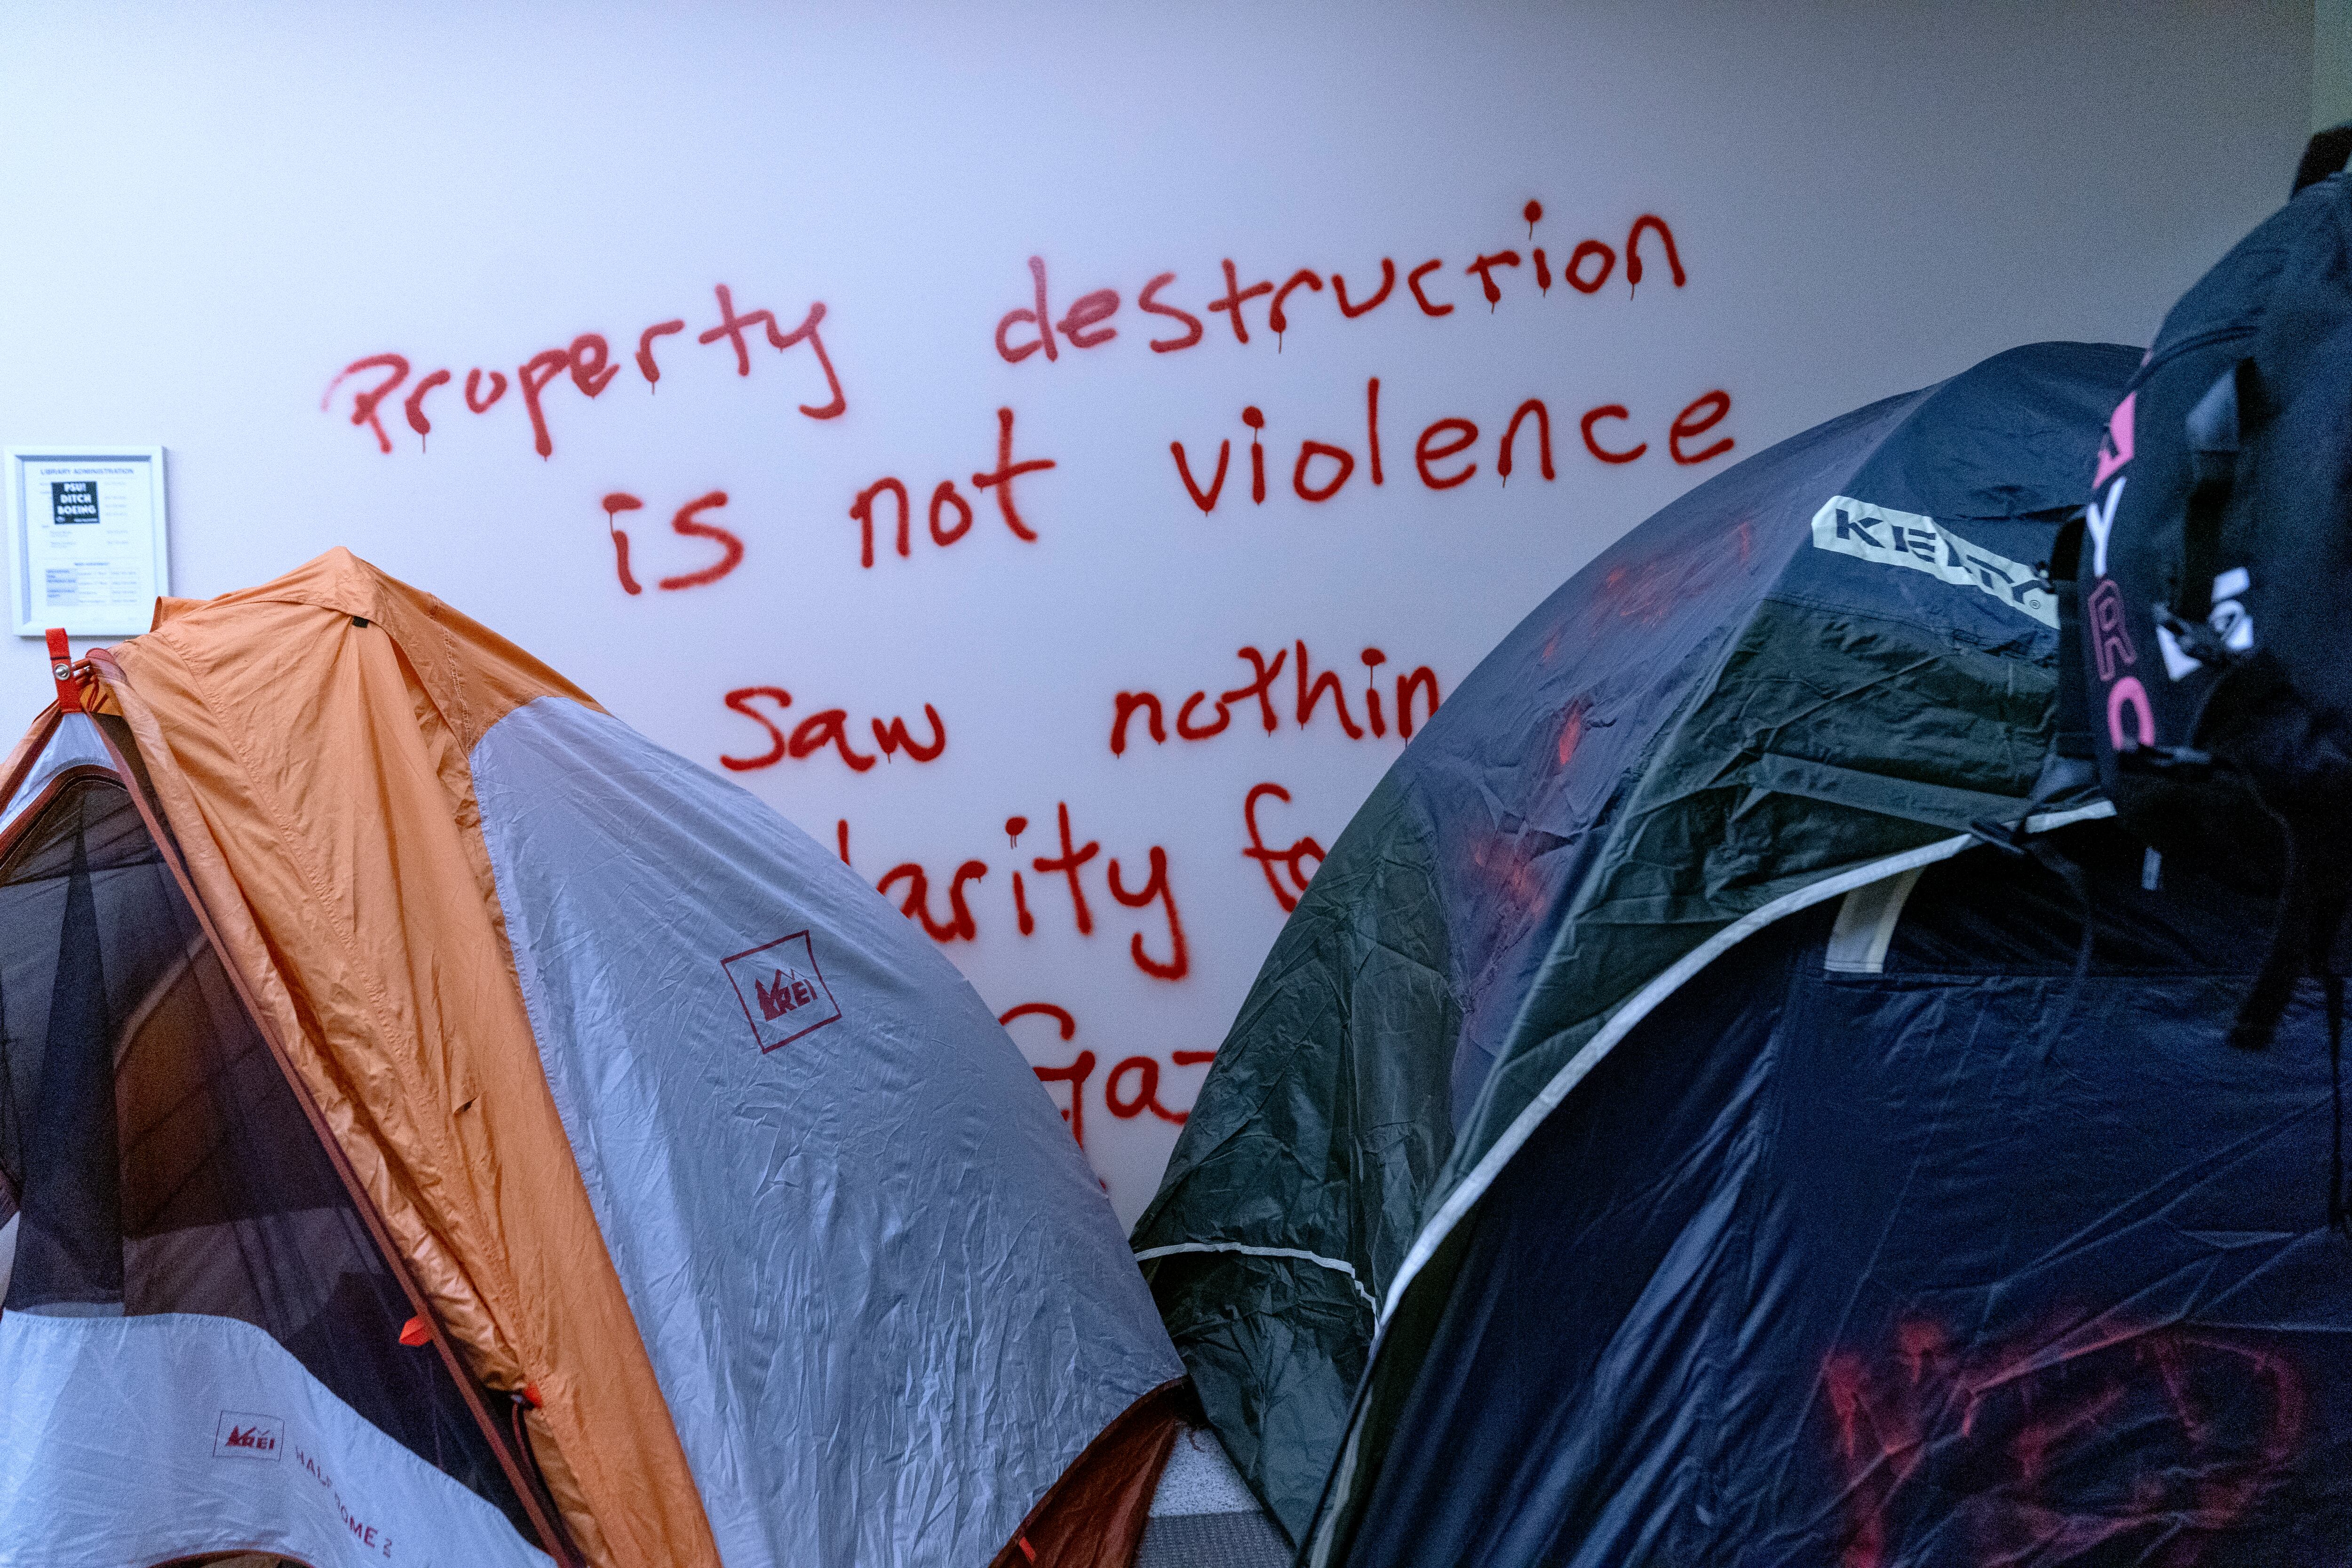 Tents inside the occupied Branford Price Millar Library at Portland State University.